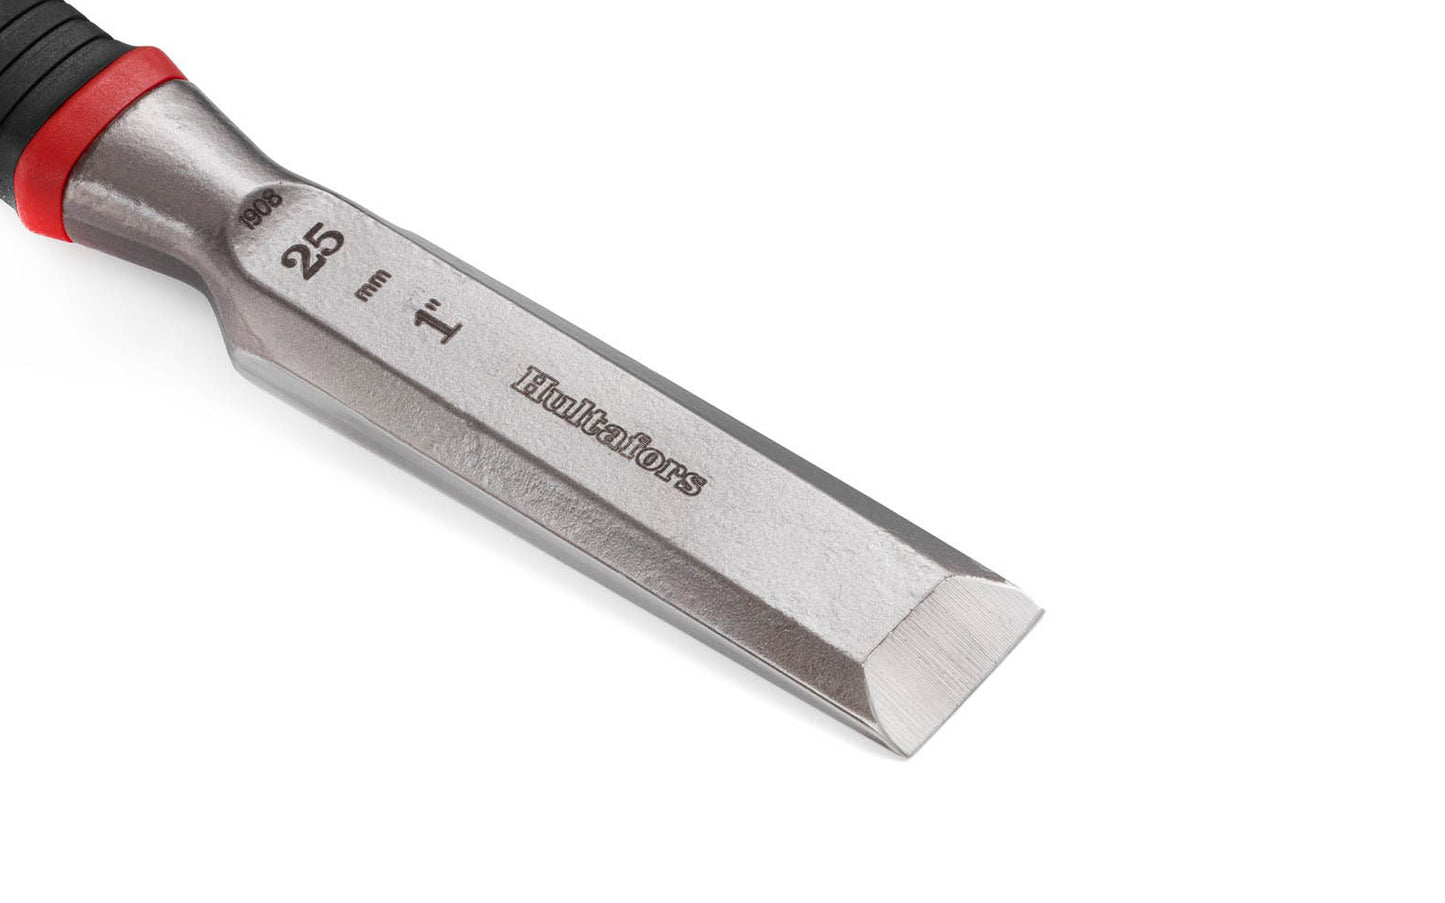 Hultafors Chisels are sharp & heavy duty. For construction tasks requiring extreme strength & precision. Bevelled 25° ground blade. One solid forged I-Beam piece. 1" wide chisel blade (25 mm). Flat contact surface. Santoprene rubberized handle. HDC 25 Model 390273U. With replaceable striker cap. 7315293902713. 